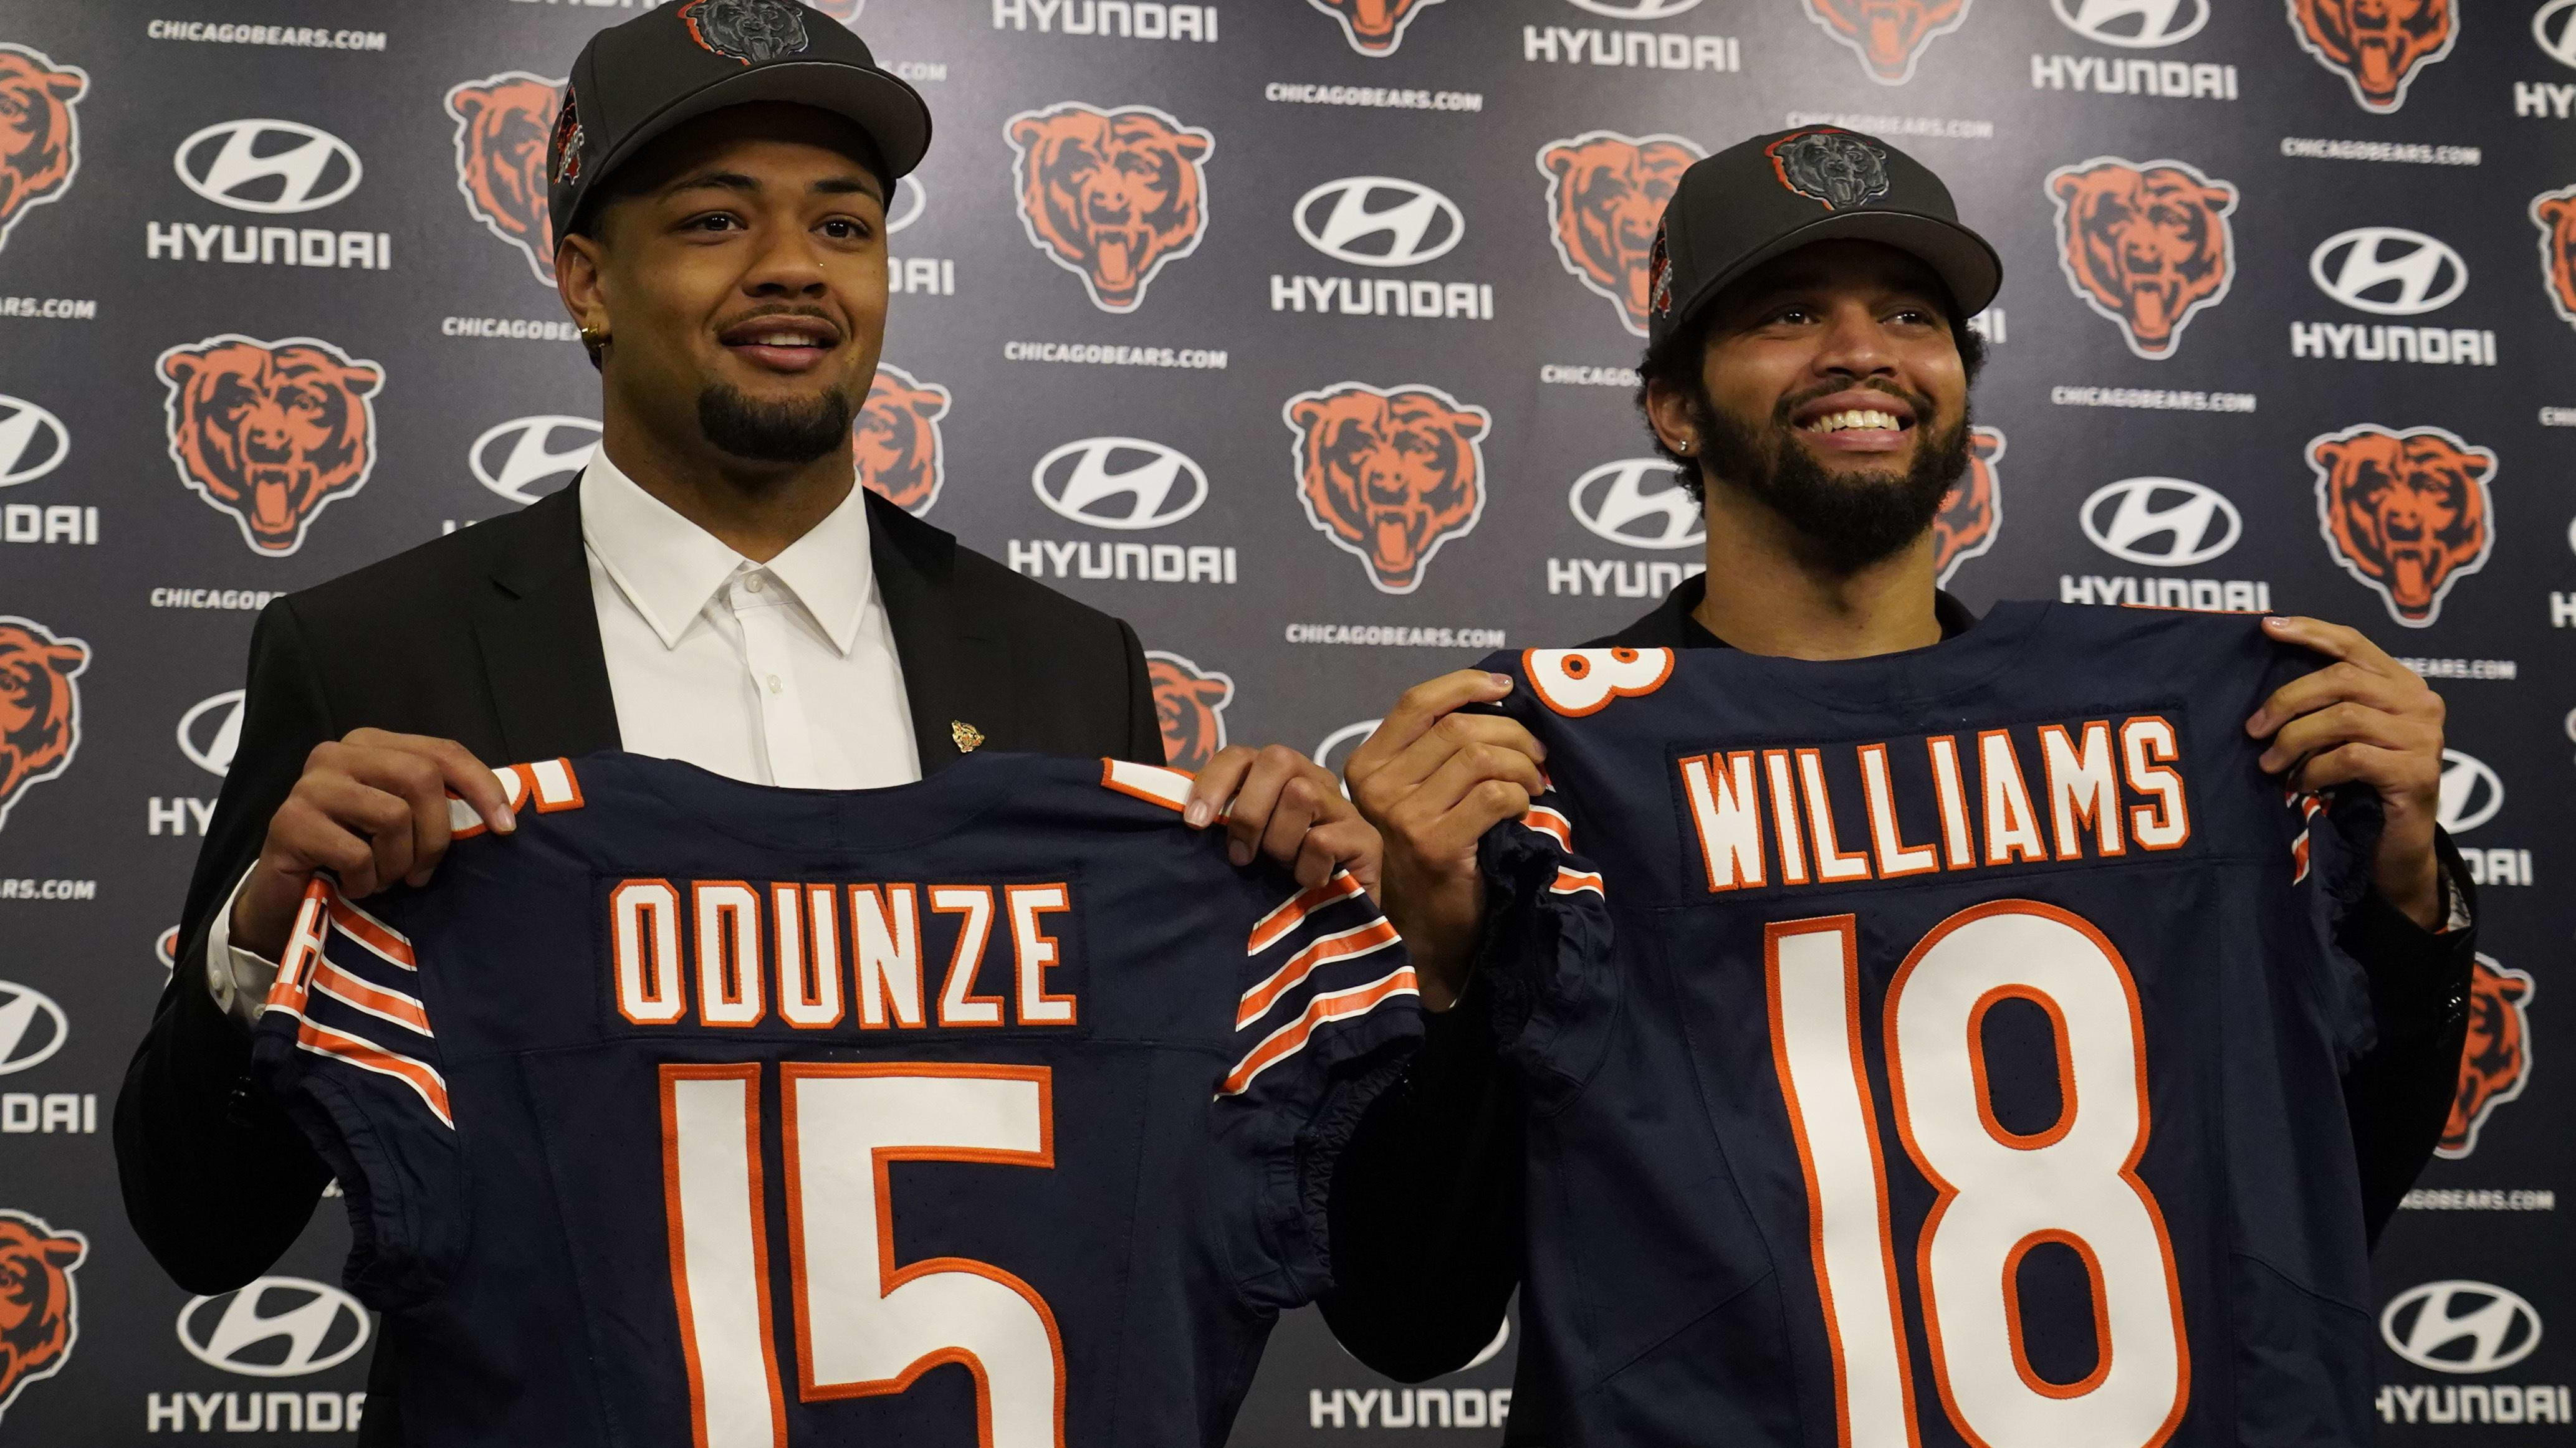 Rome Odunze holds up his 15 jersey and Caleb Williams his 18 at their first Halas Hall press conference.